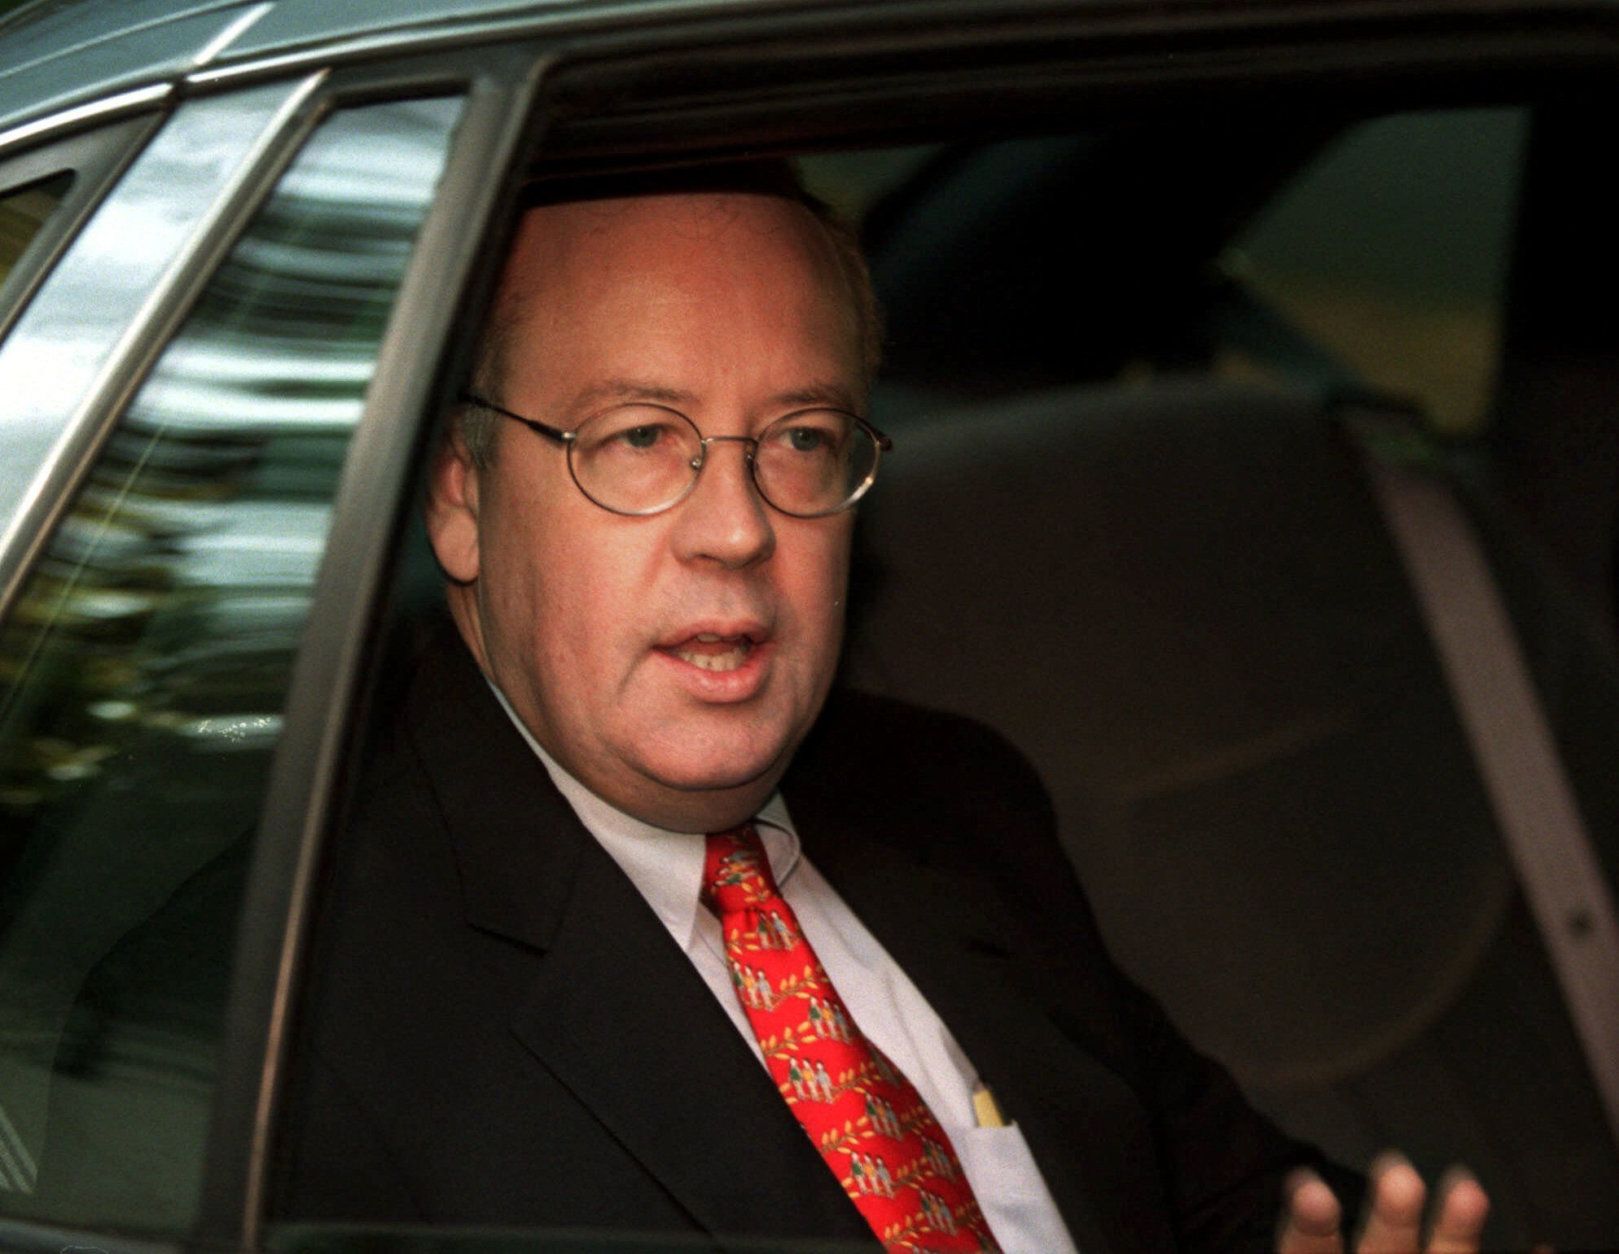 Independent Counsel Kenneth Starr departs his home by car Thursday morning, Sept. 10, 1998, in McLean, Va. The 445-page Starr report on the investigation into the affair between President Clinton and former White House intern Monica Lewinsky was delivered to Congress Wednesday afternoon. (AP Photo/Khue Bui)